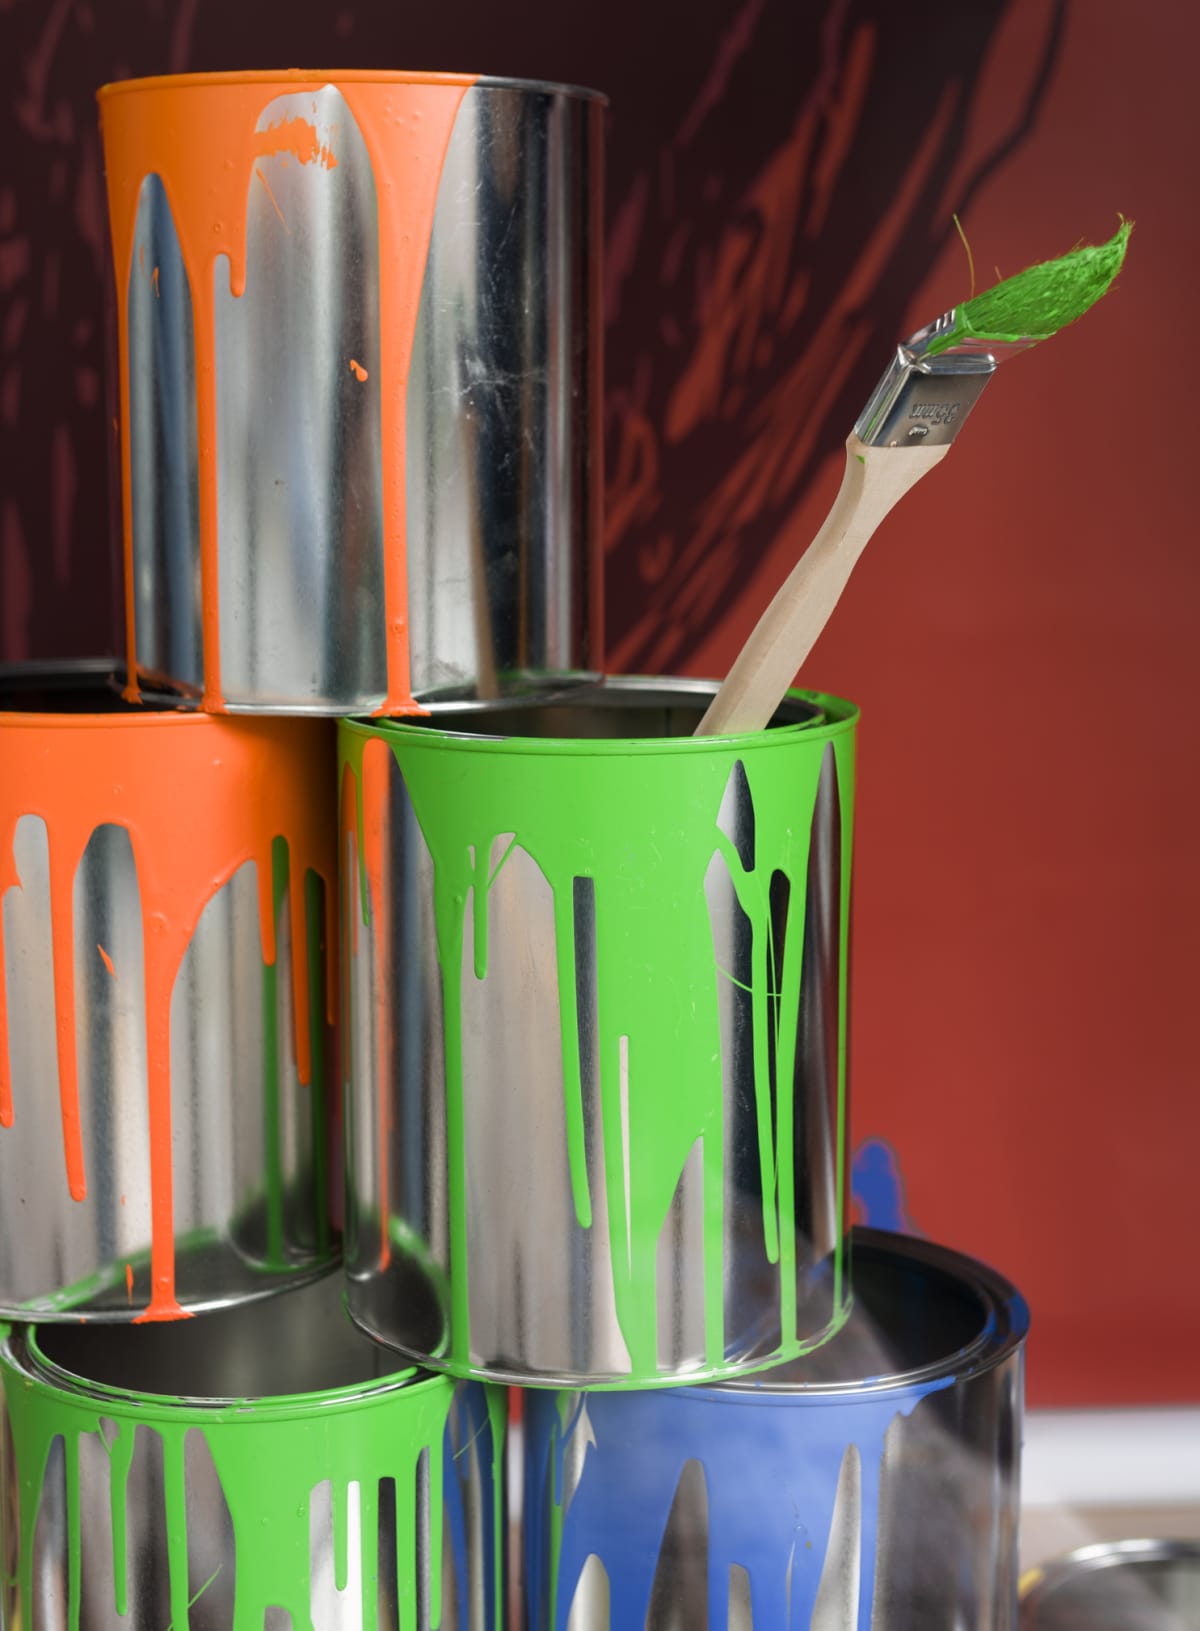 Painting equipment with paint cans and paintbrush.